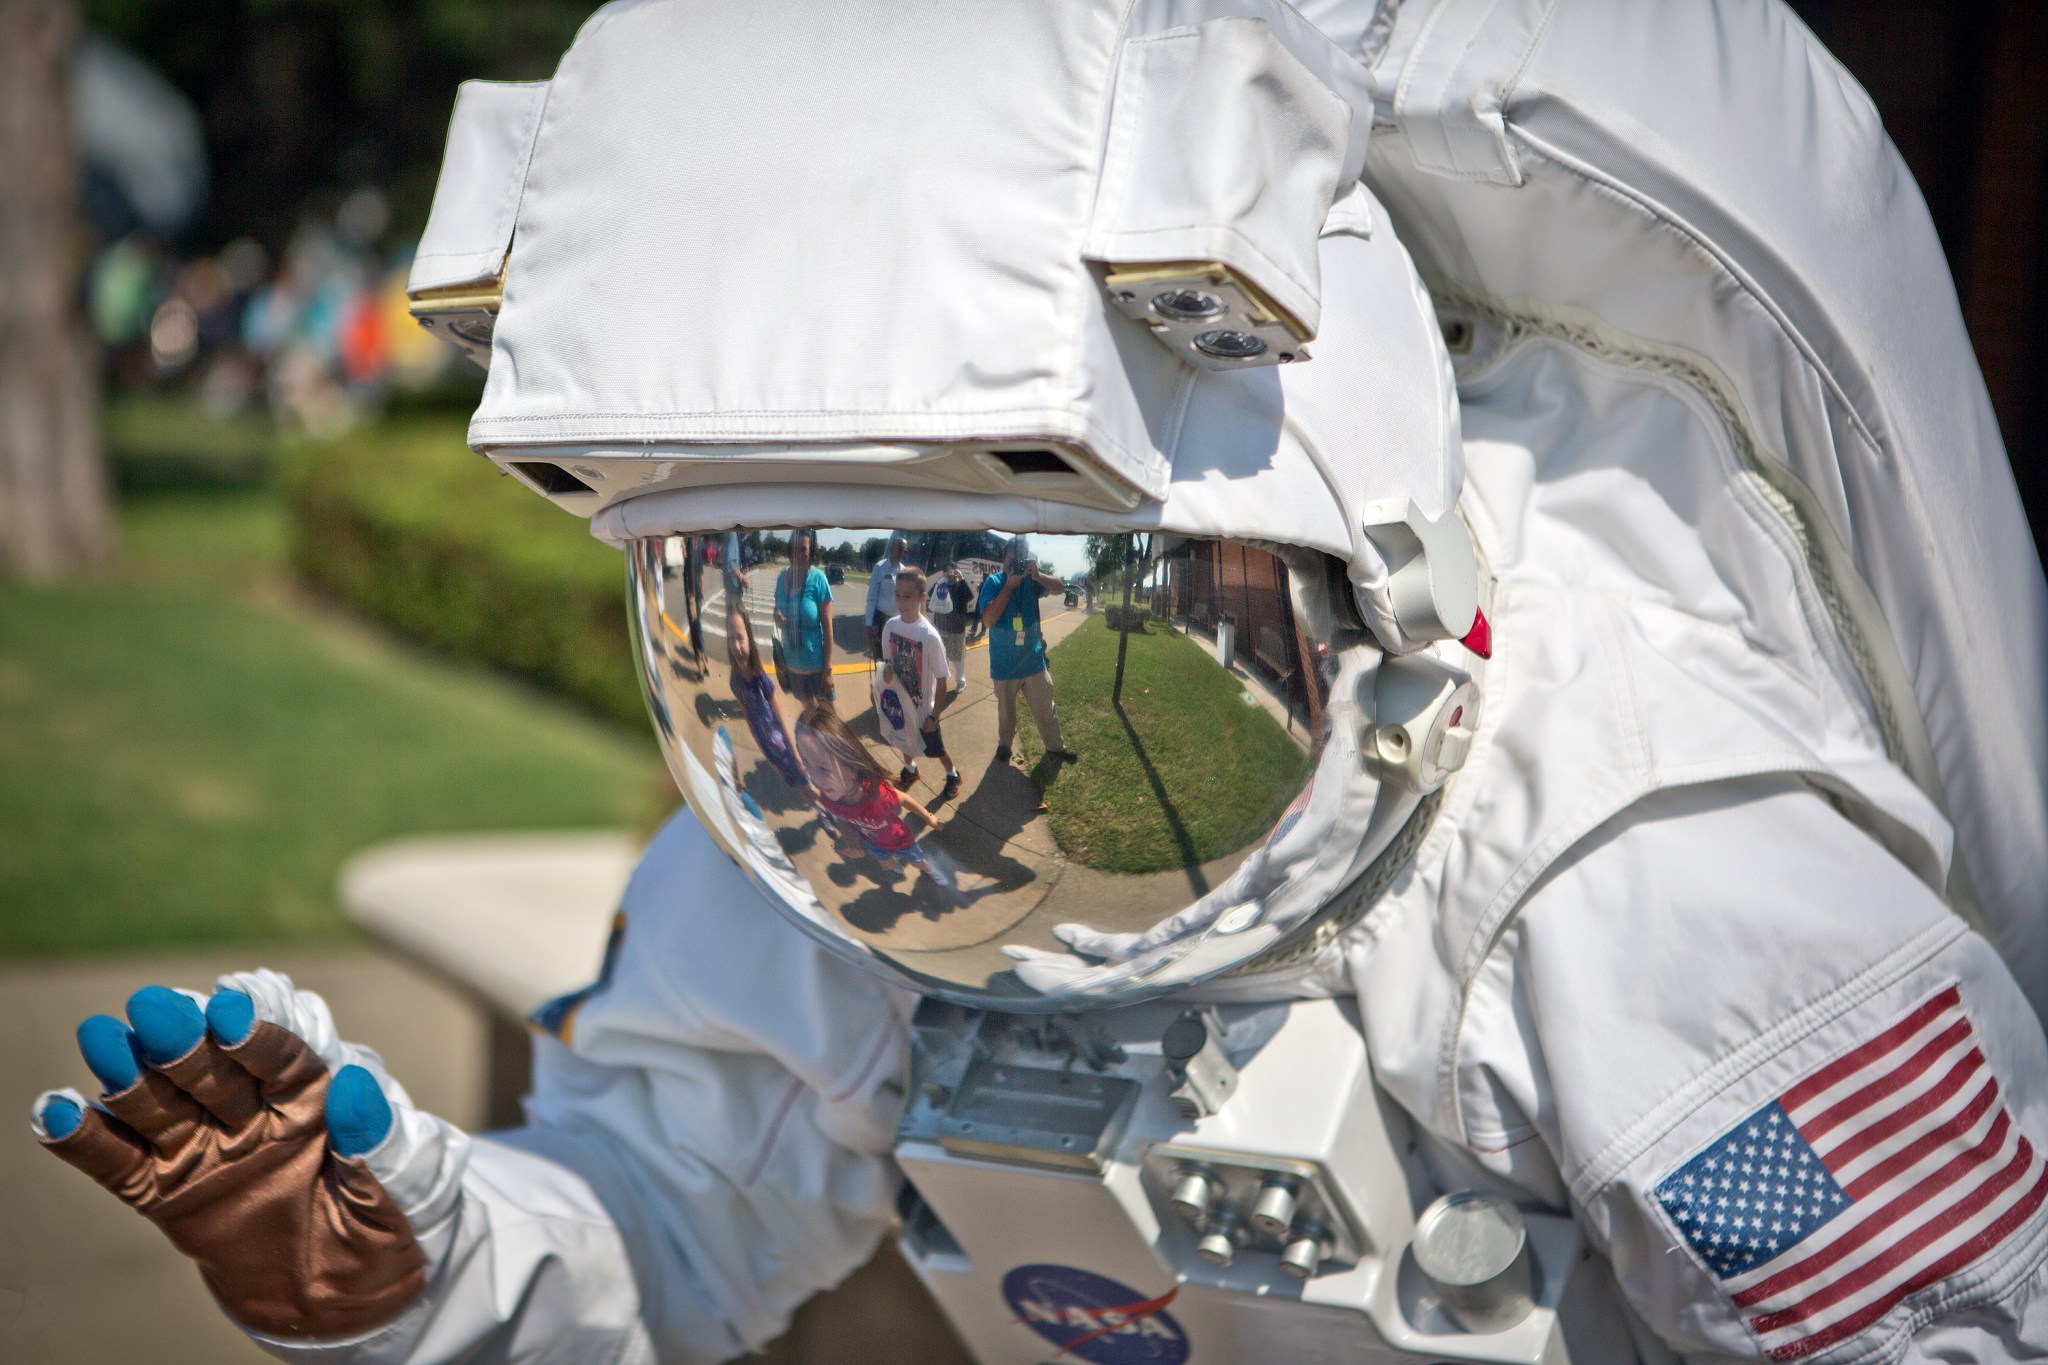 A NASA Langley Research Center employee in a space suit greets NASA fans.